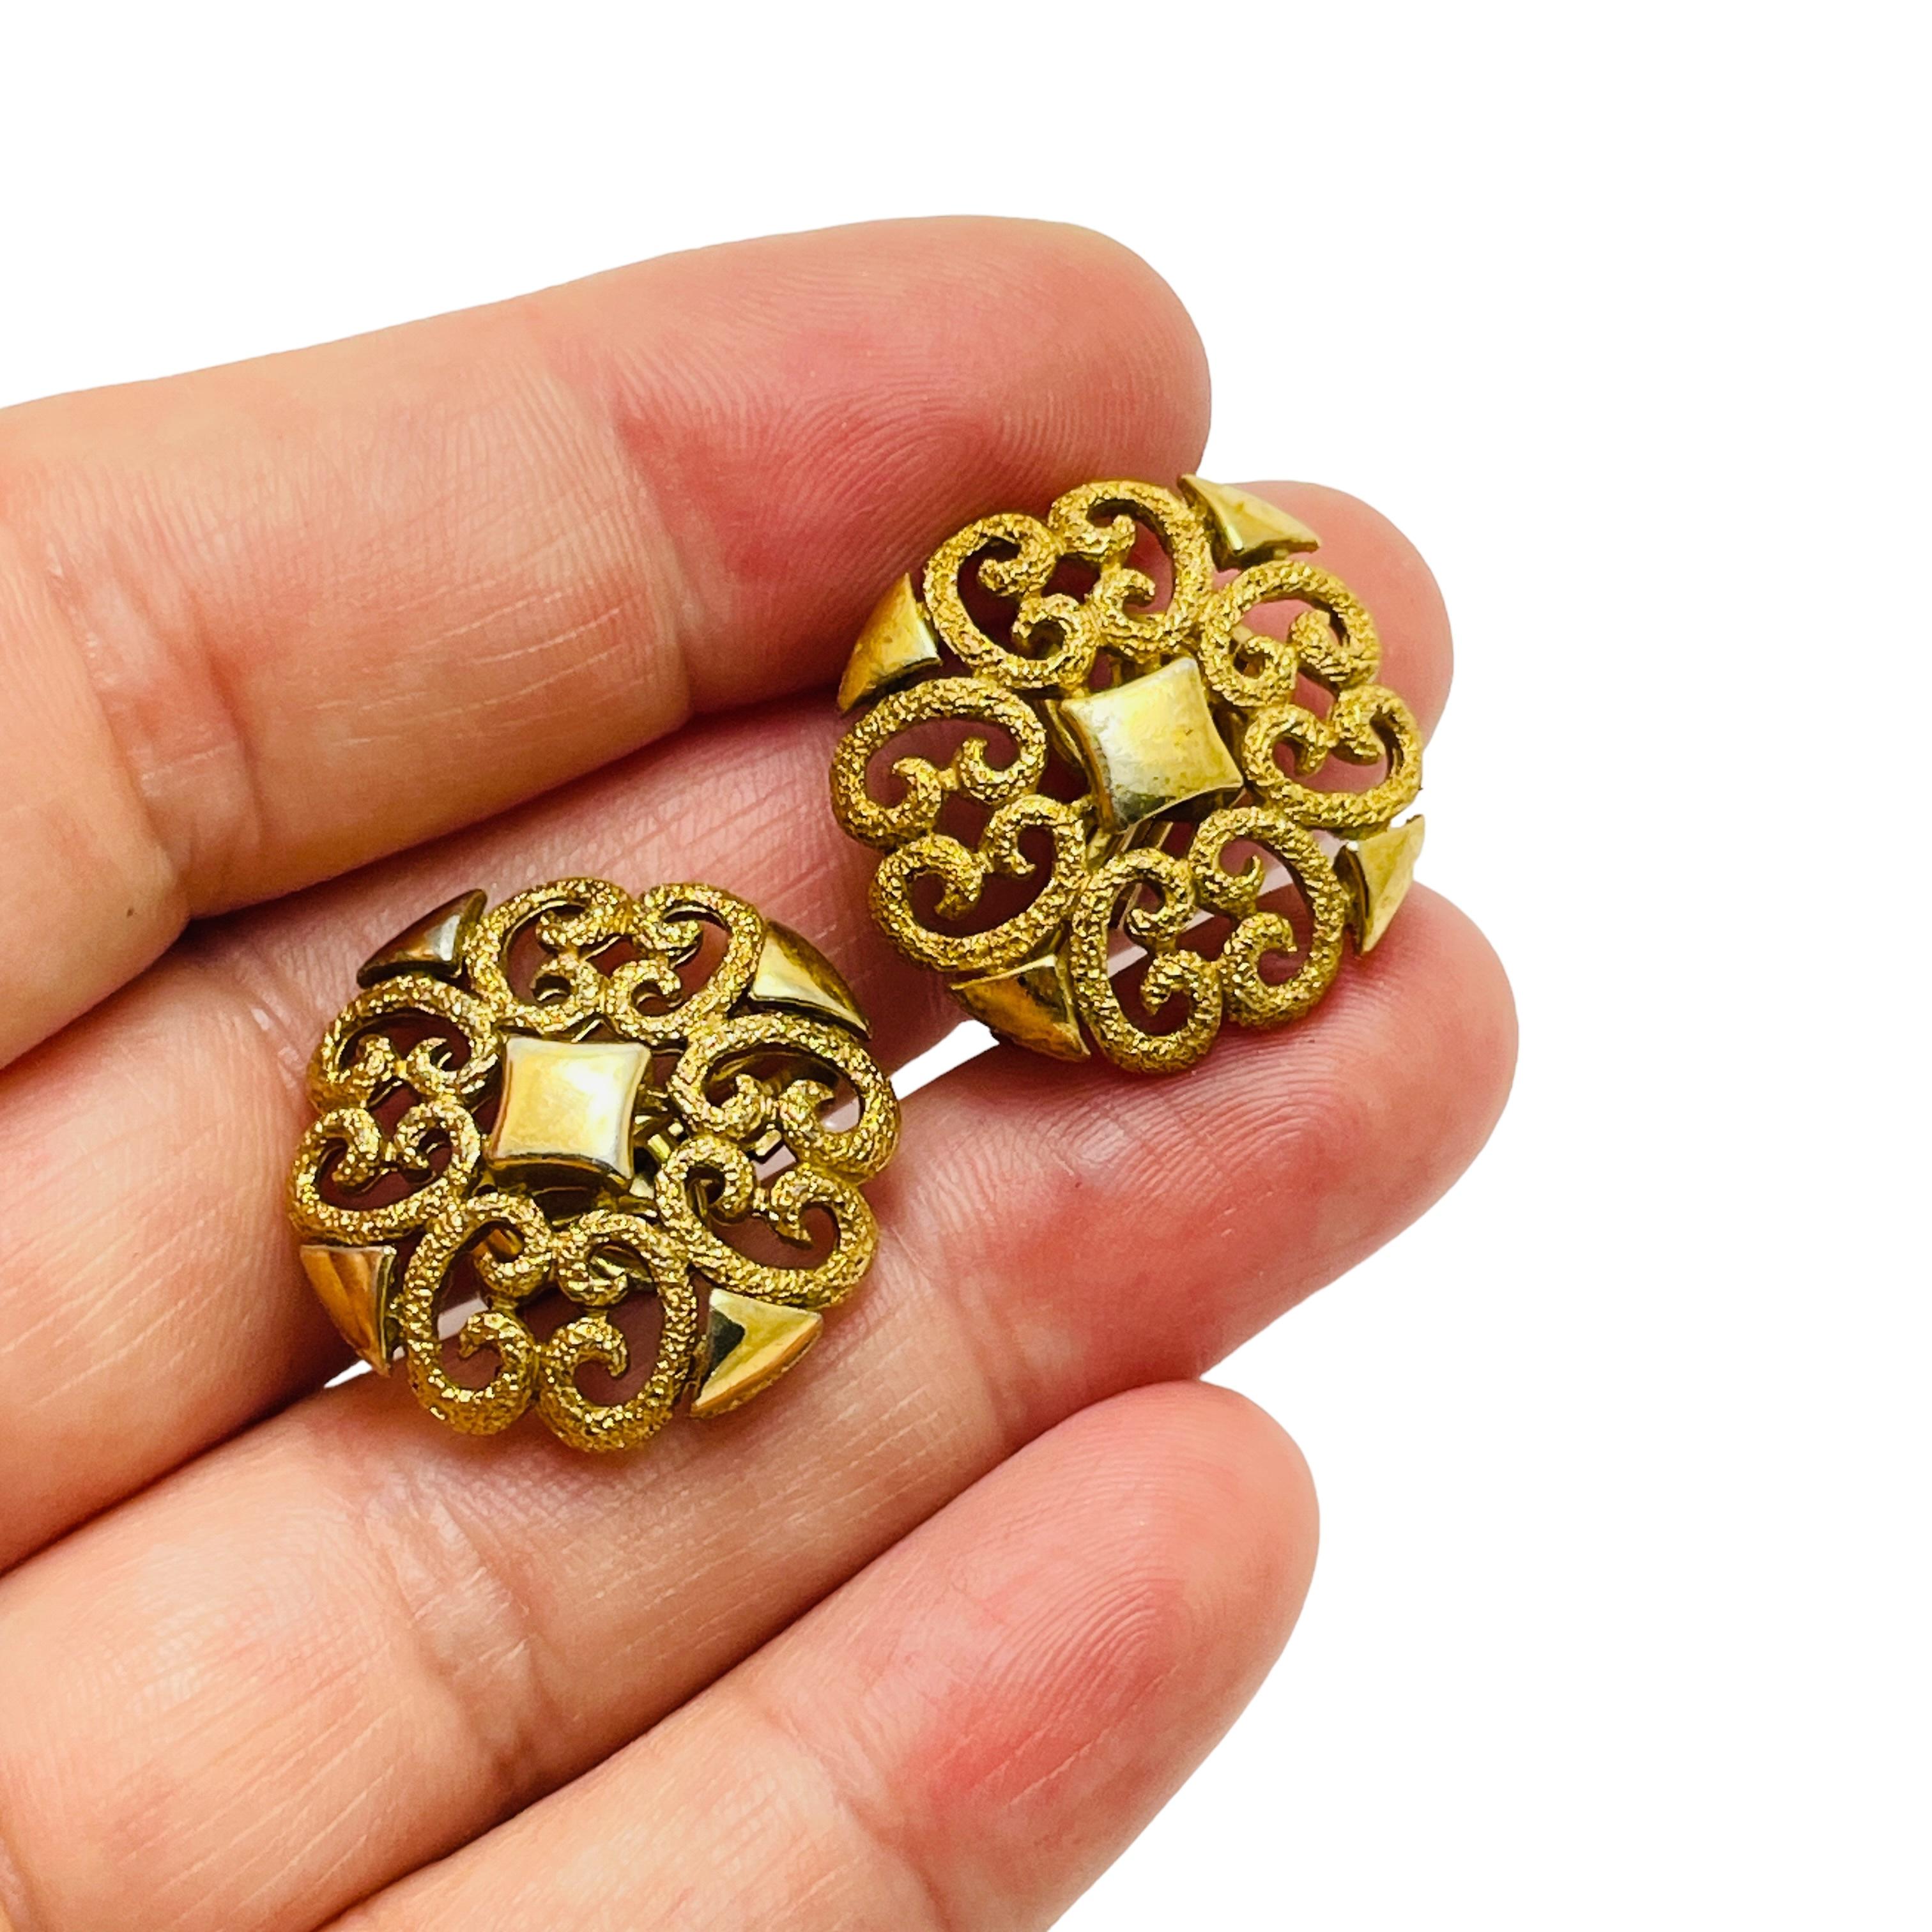 DETAILS

• signed TRIFARI

• gold tone 

• vintage designer earrings

MEASUREMENTS

• 

CONDITION

• excellent vintage condition with minimal signs of wear

❤️❤️ VINTAGE DESIGNER JEWELRY ❤️❤️
❤️❤️ ALEXANDER'S BOUTIQUE ❤️❤️